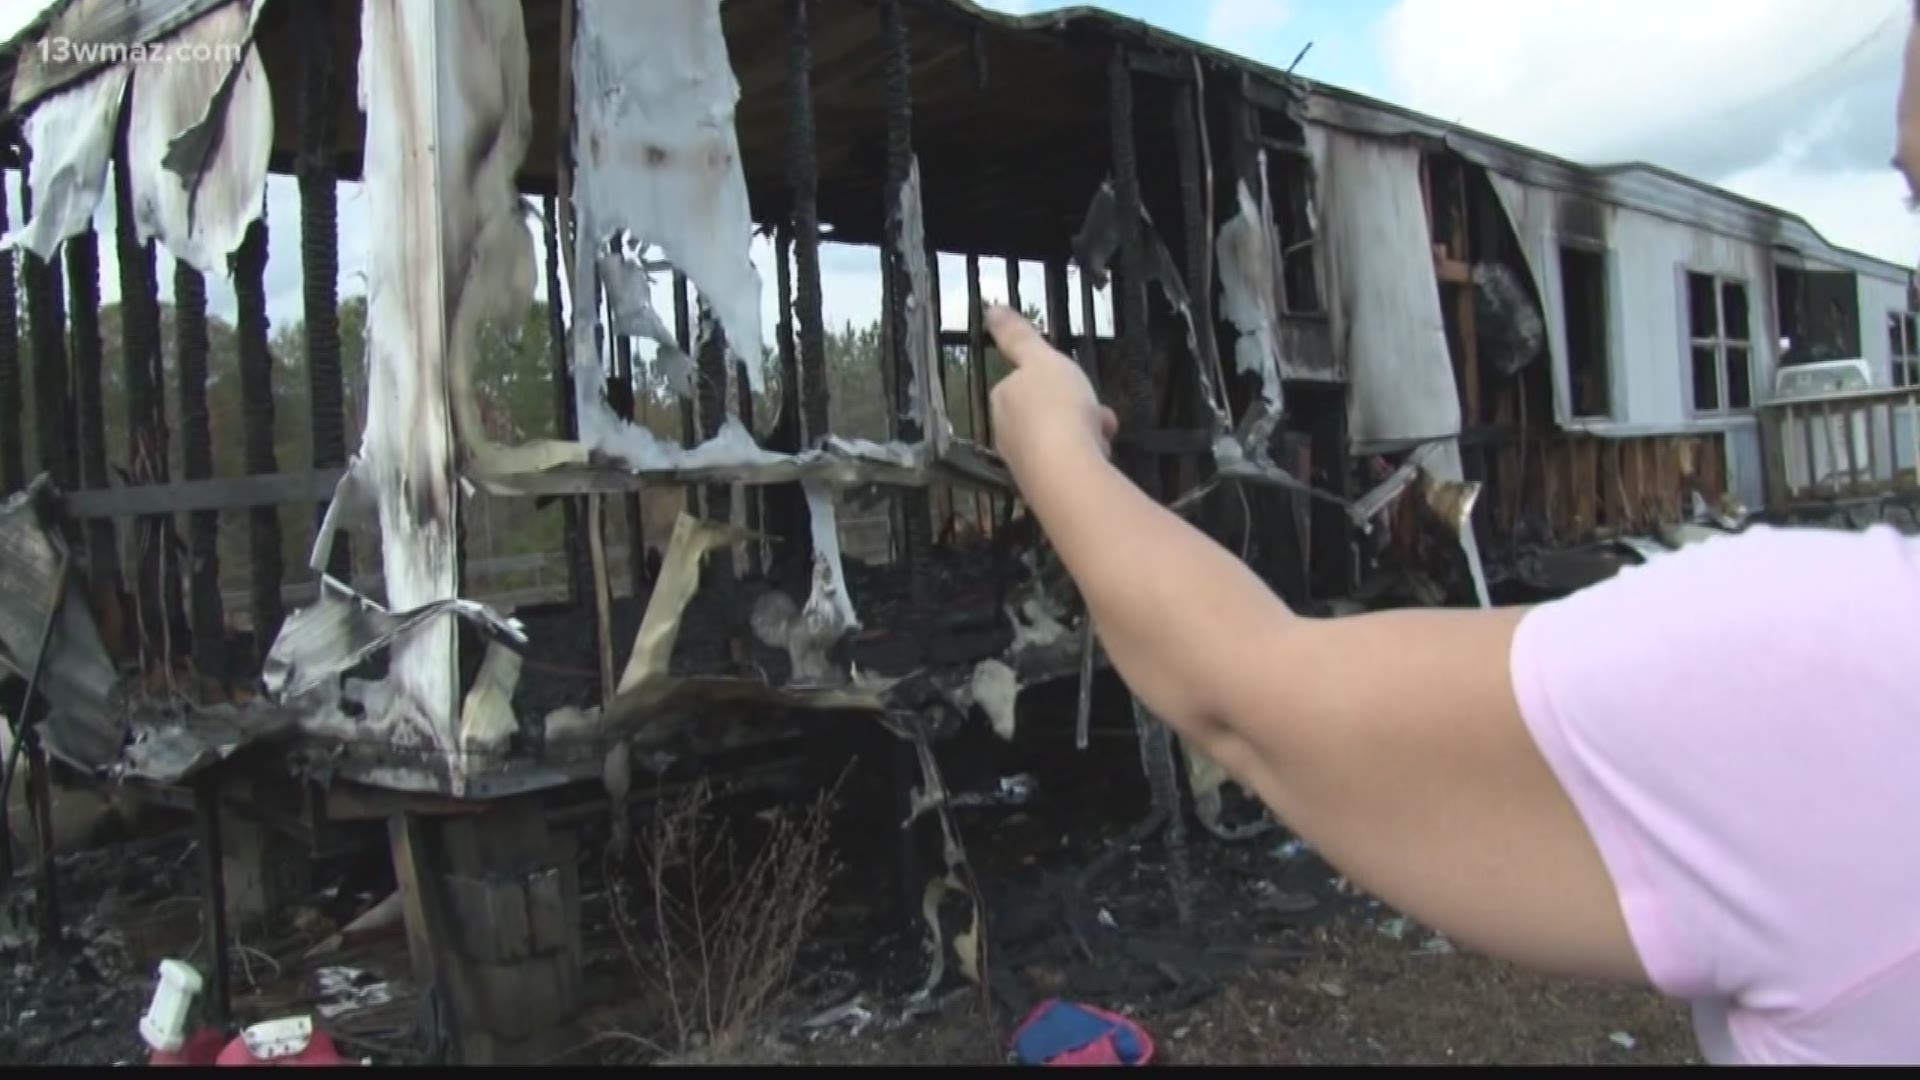 A Telfair County family's week got off to a rough start with a fire that destroyed their home. The Smith family is rebuilding with some help from neighbors.